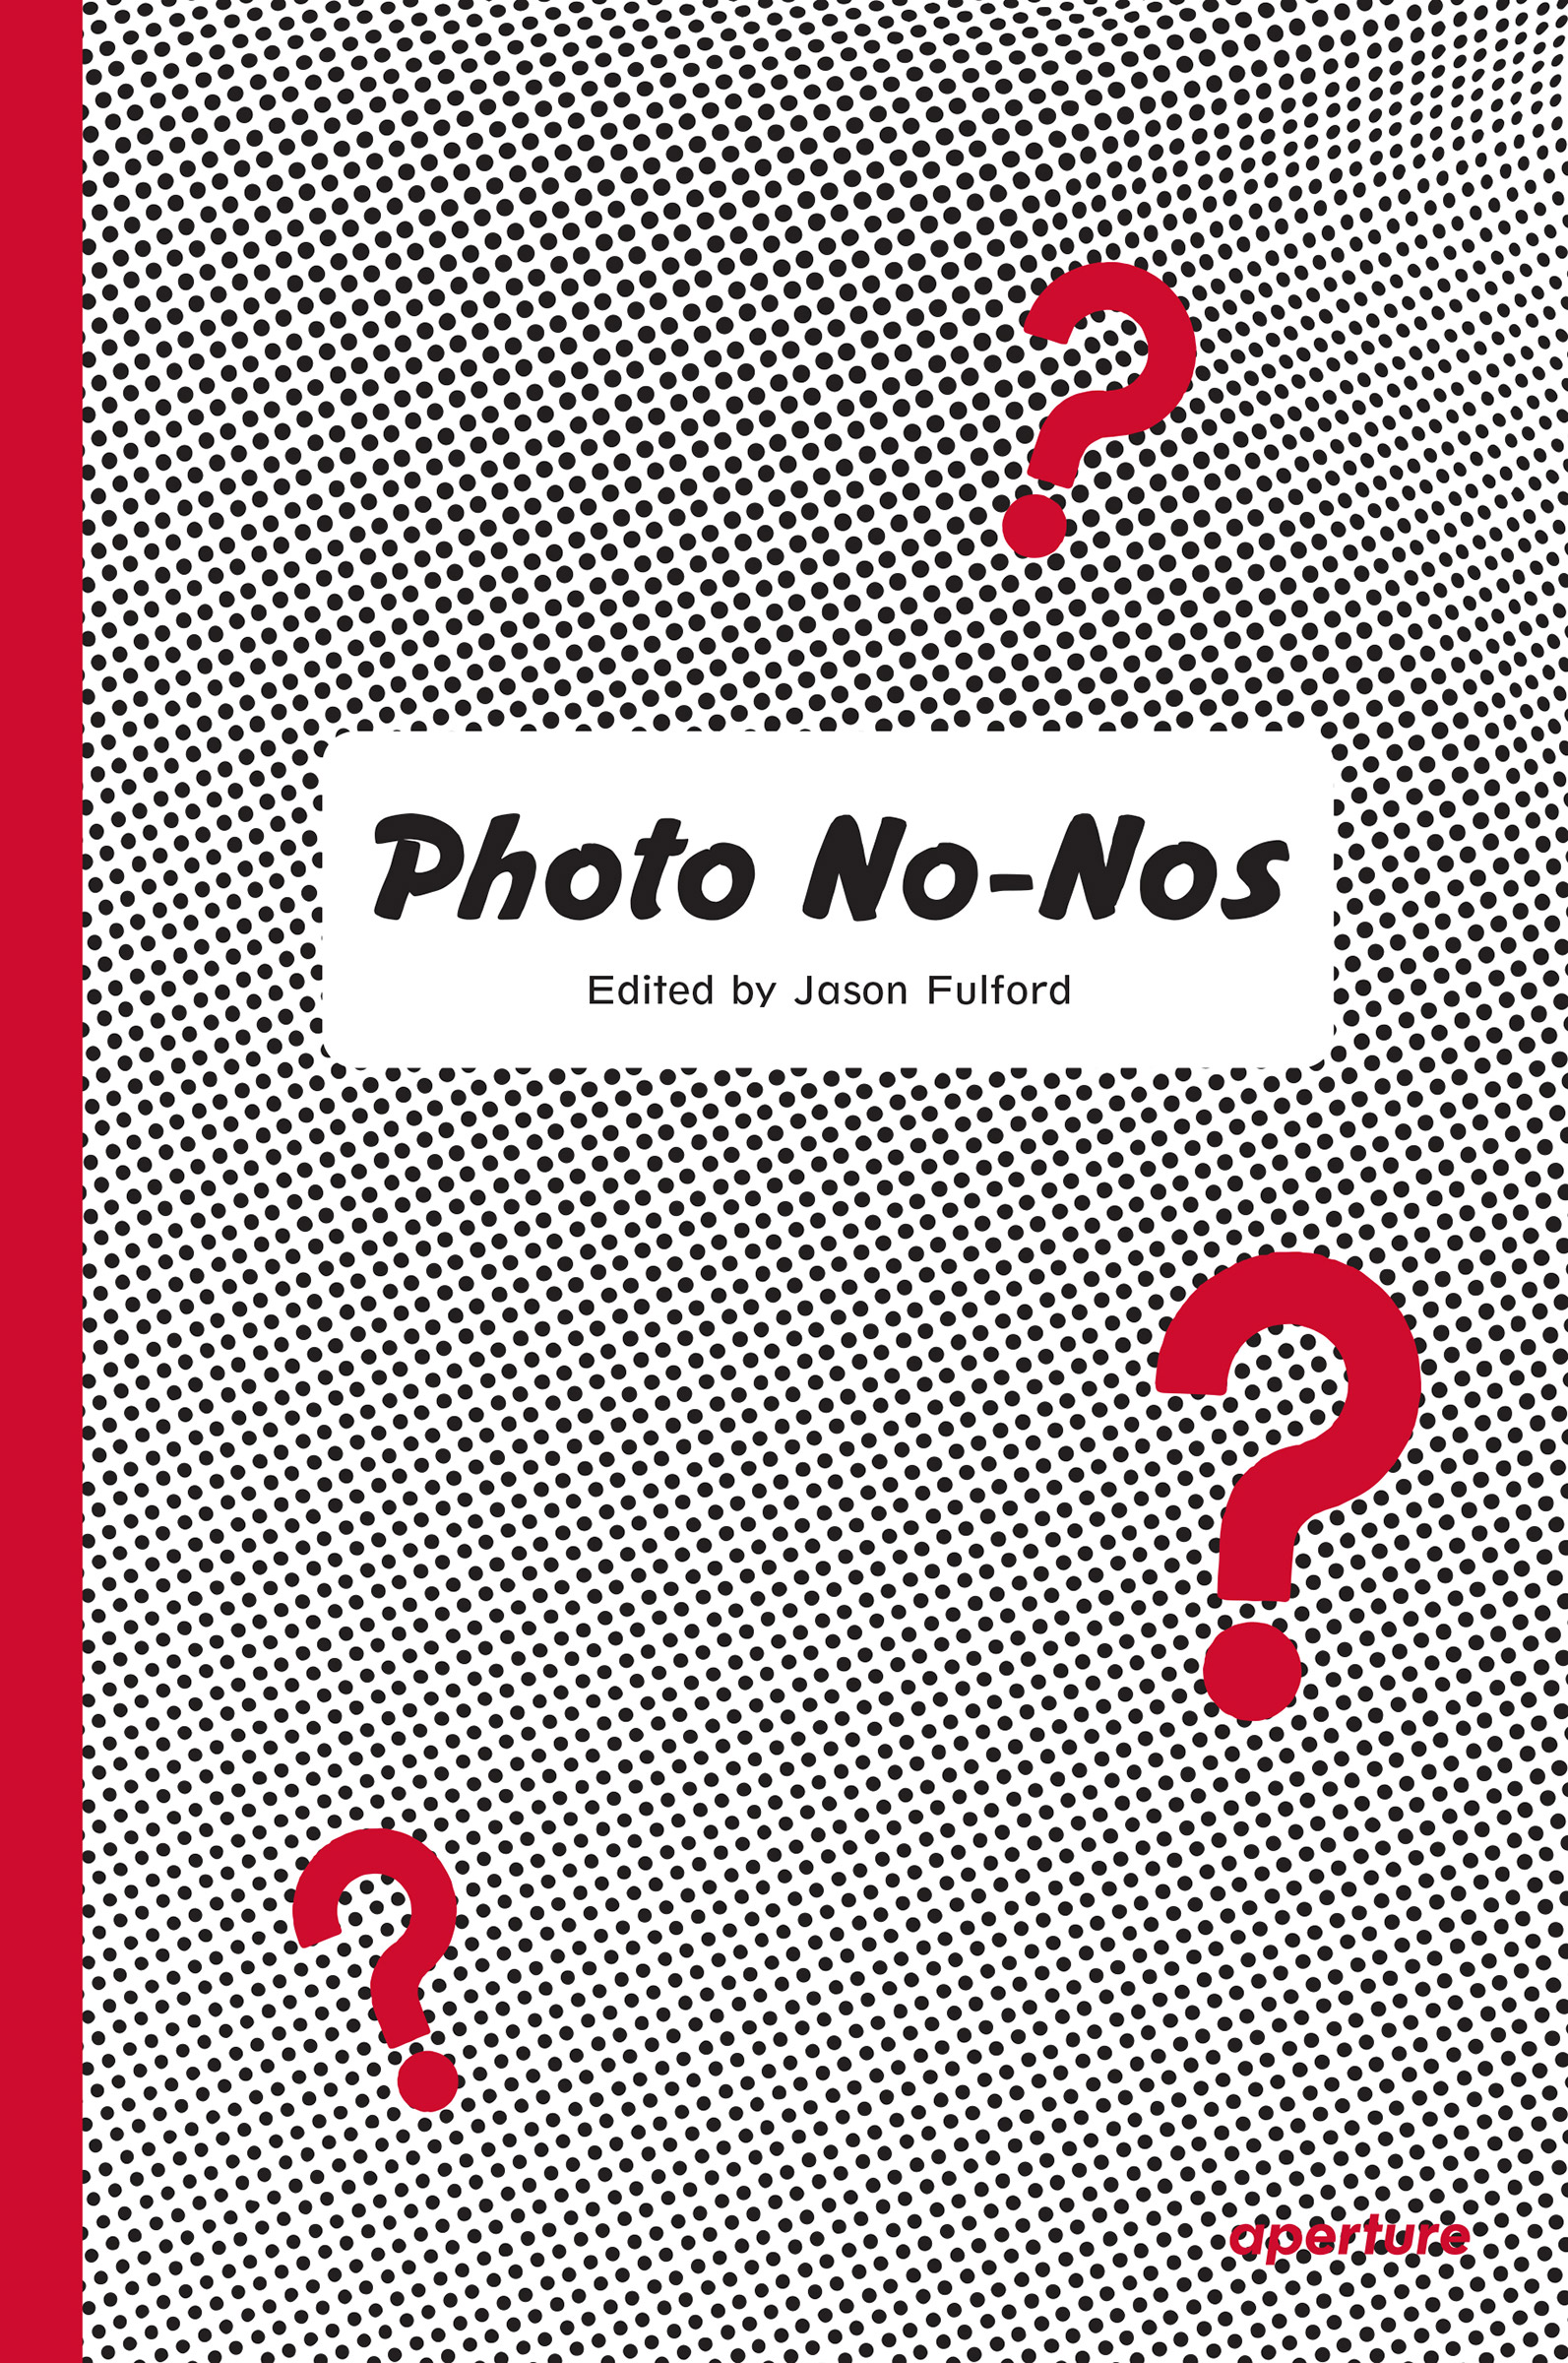 Photo No-Nos: Meditations on What Not to Photograph edited by Jason Fulford (Aperture)